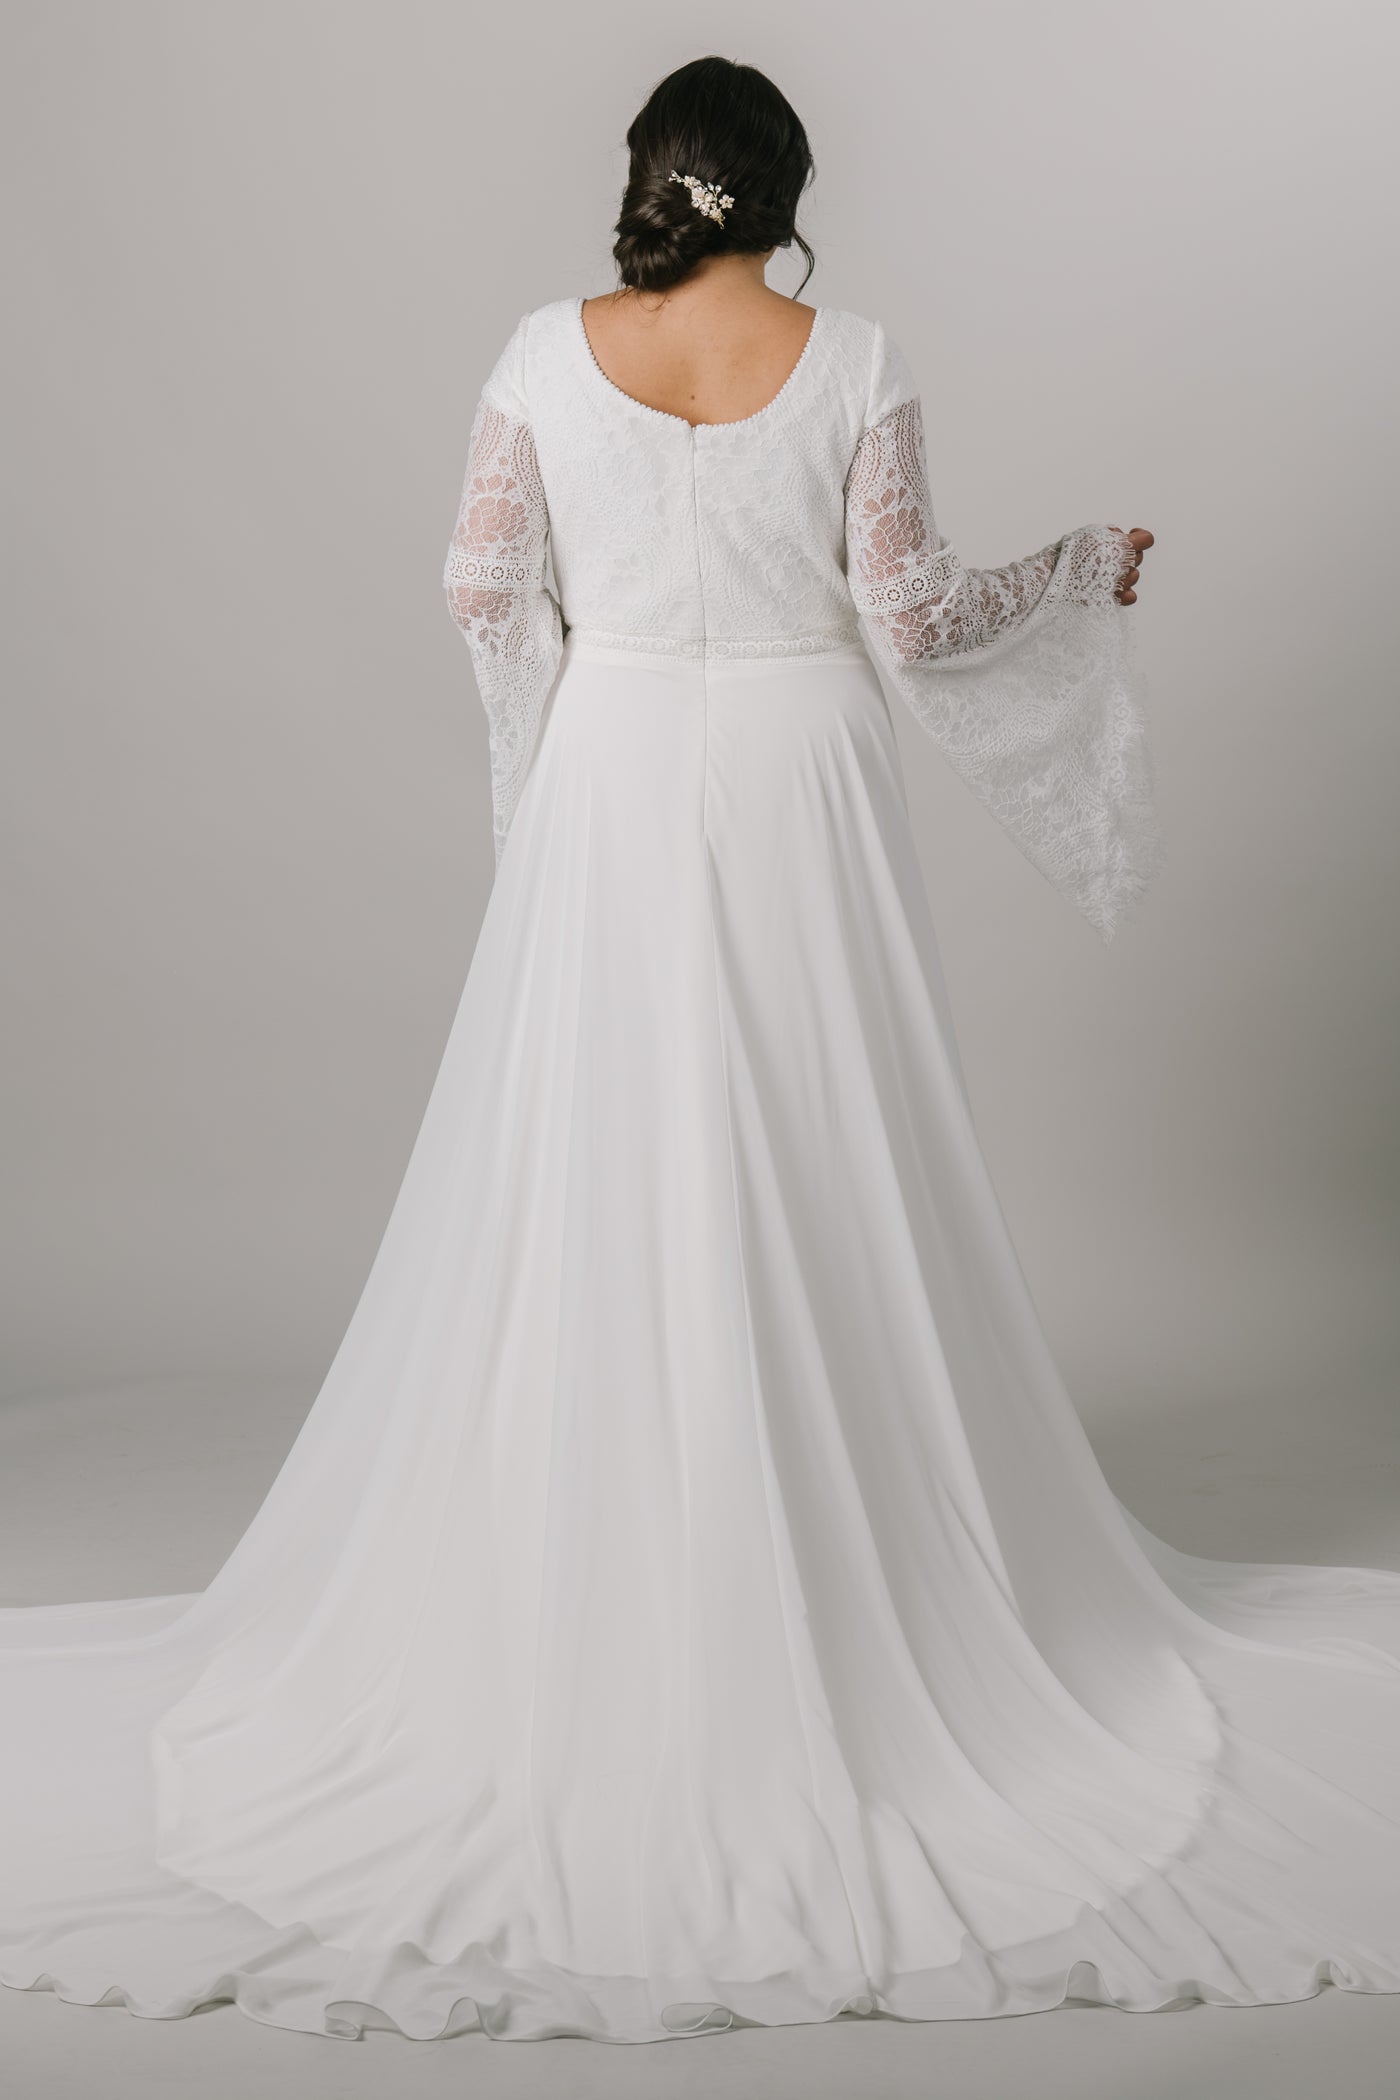 This plus-size modest wedding dress is perfect for our bohemian brides. The A-line silhouette makes it flattering on all figures. The unique lace on the bodice also makes for beautiful, flowy bell sleeves. From a bridal shop in downtown Salt Lake City called LatterDayBride.